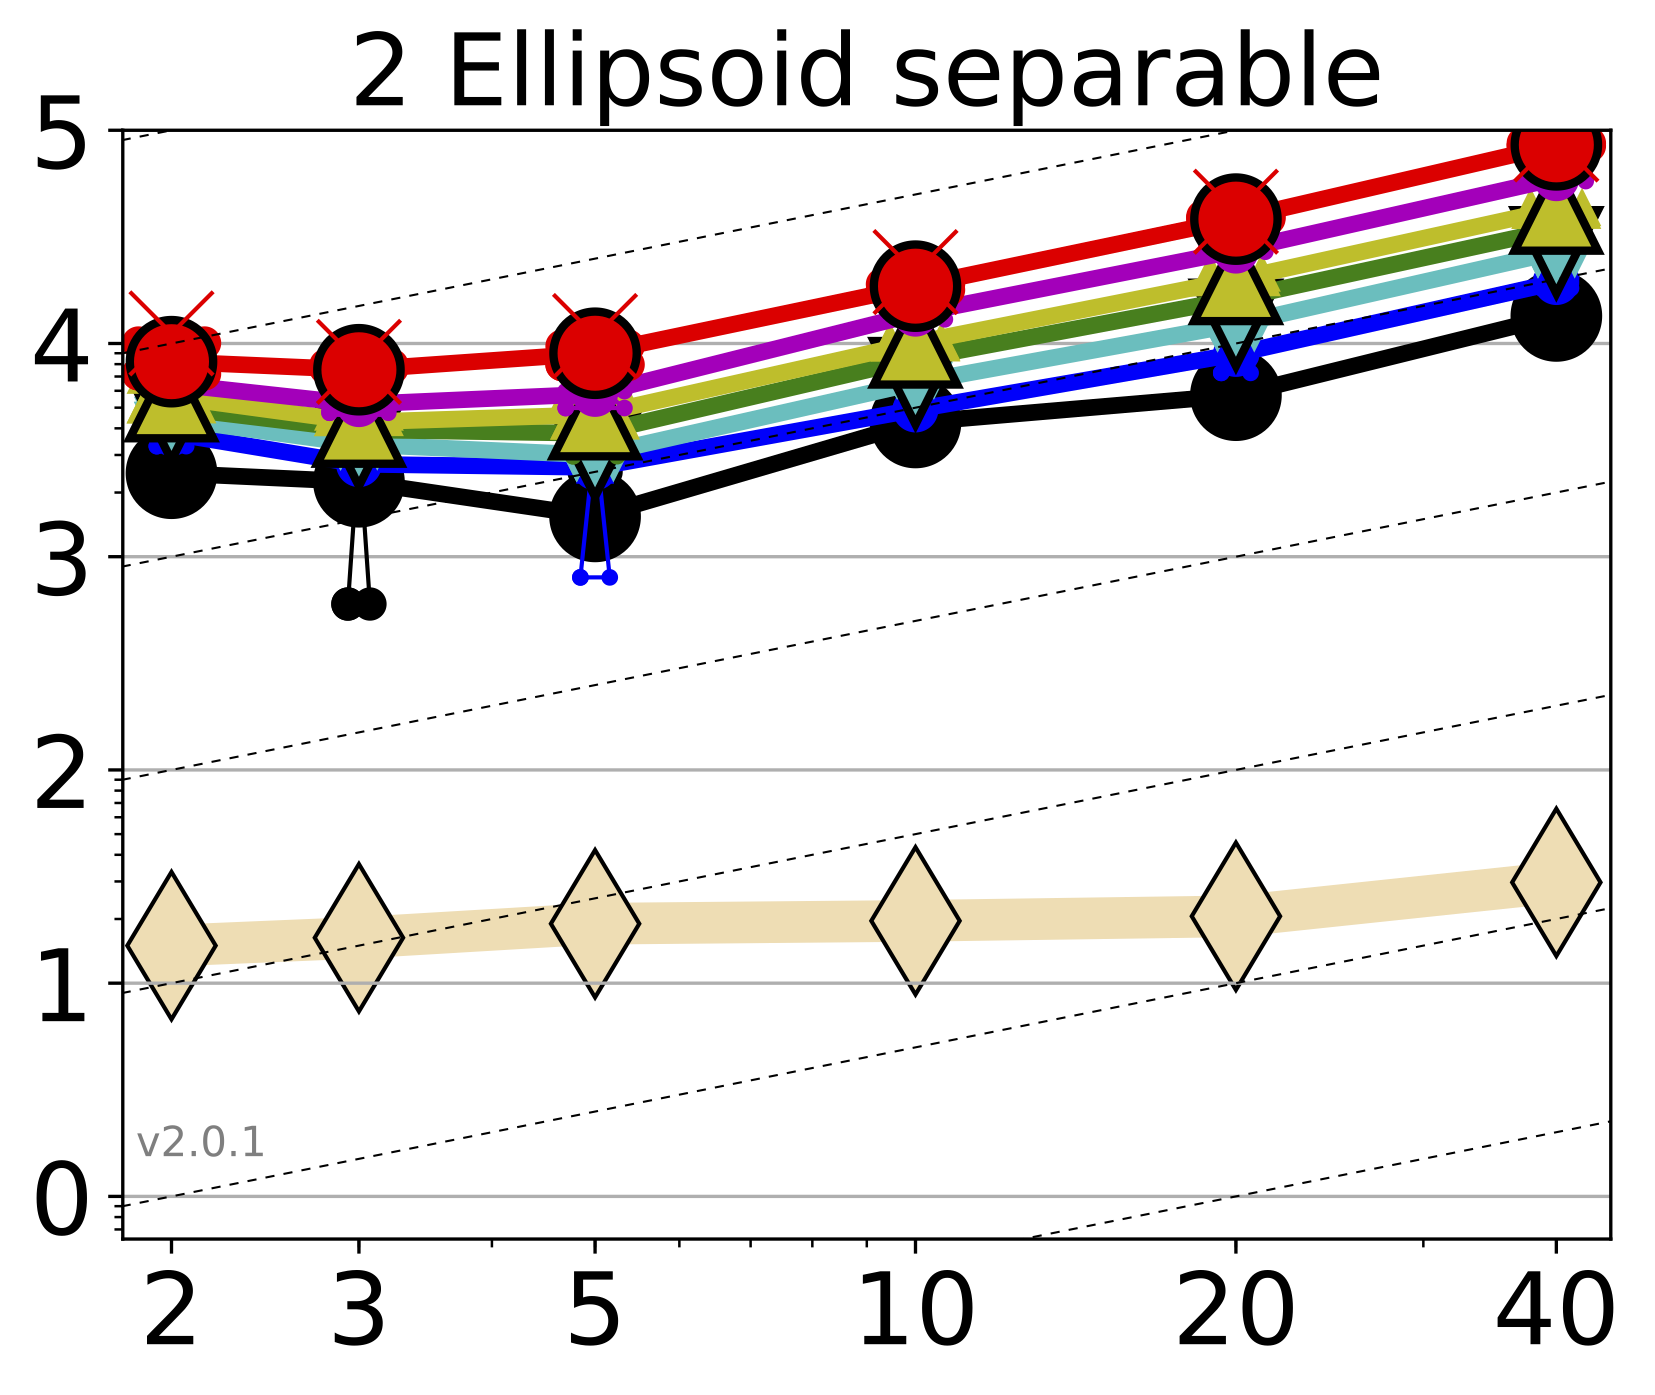 Results for Ellipsoid